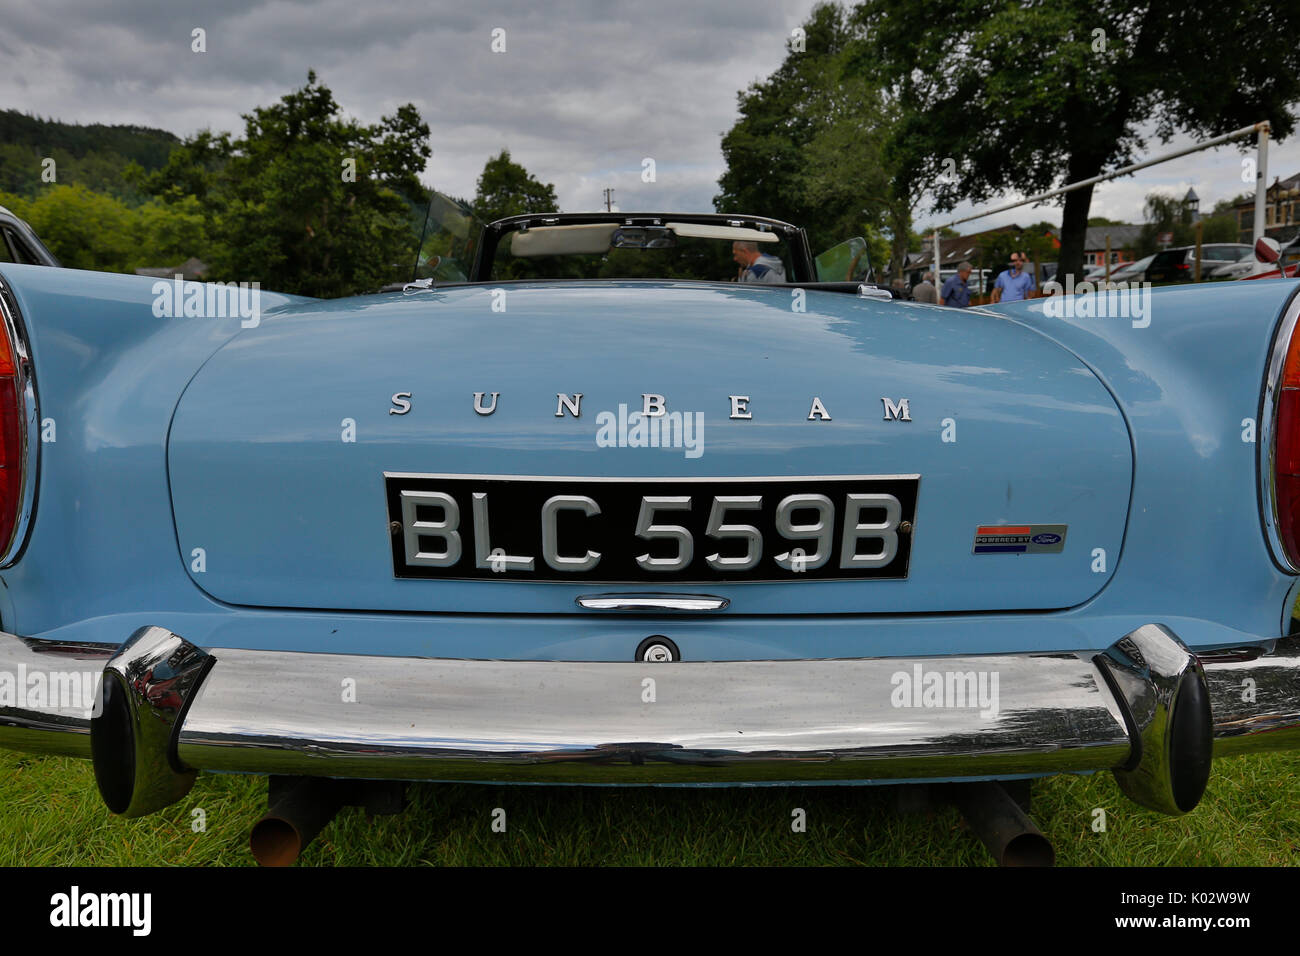 Blue classic Sunbeam parked outside. DVLA reg BLC 559B. all cars in uk belongs to dvlc. Classic blue car with nice chrome rear bumper at August 2017 Stock Photo